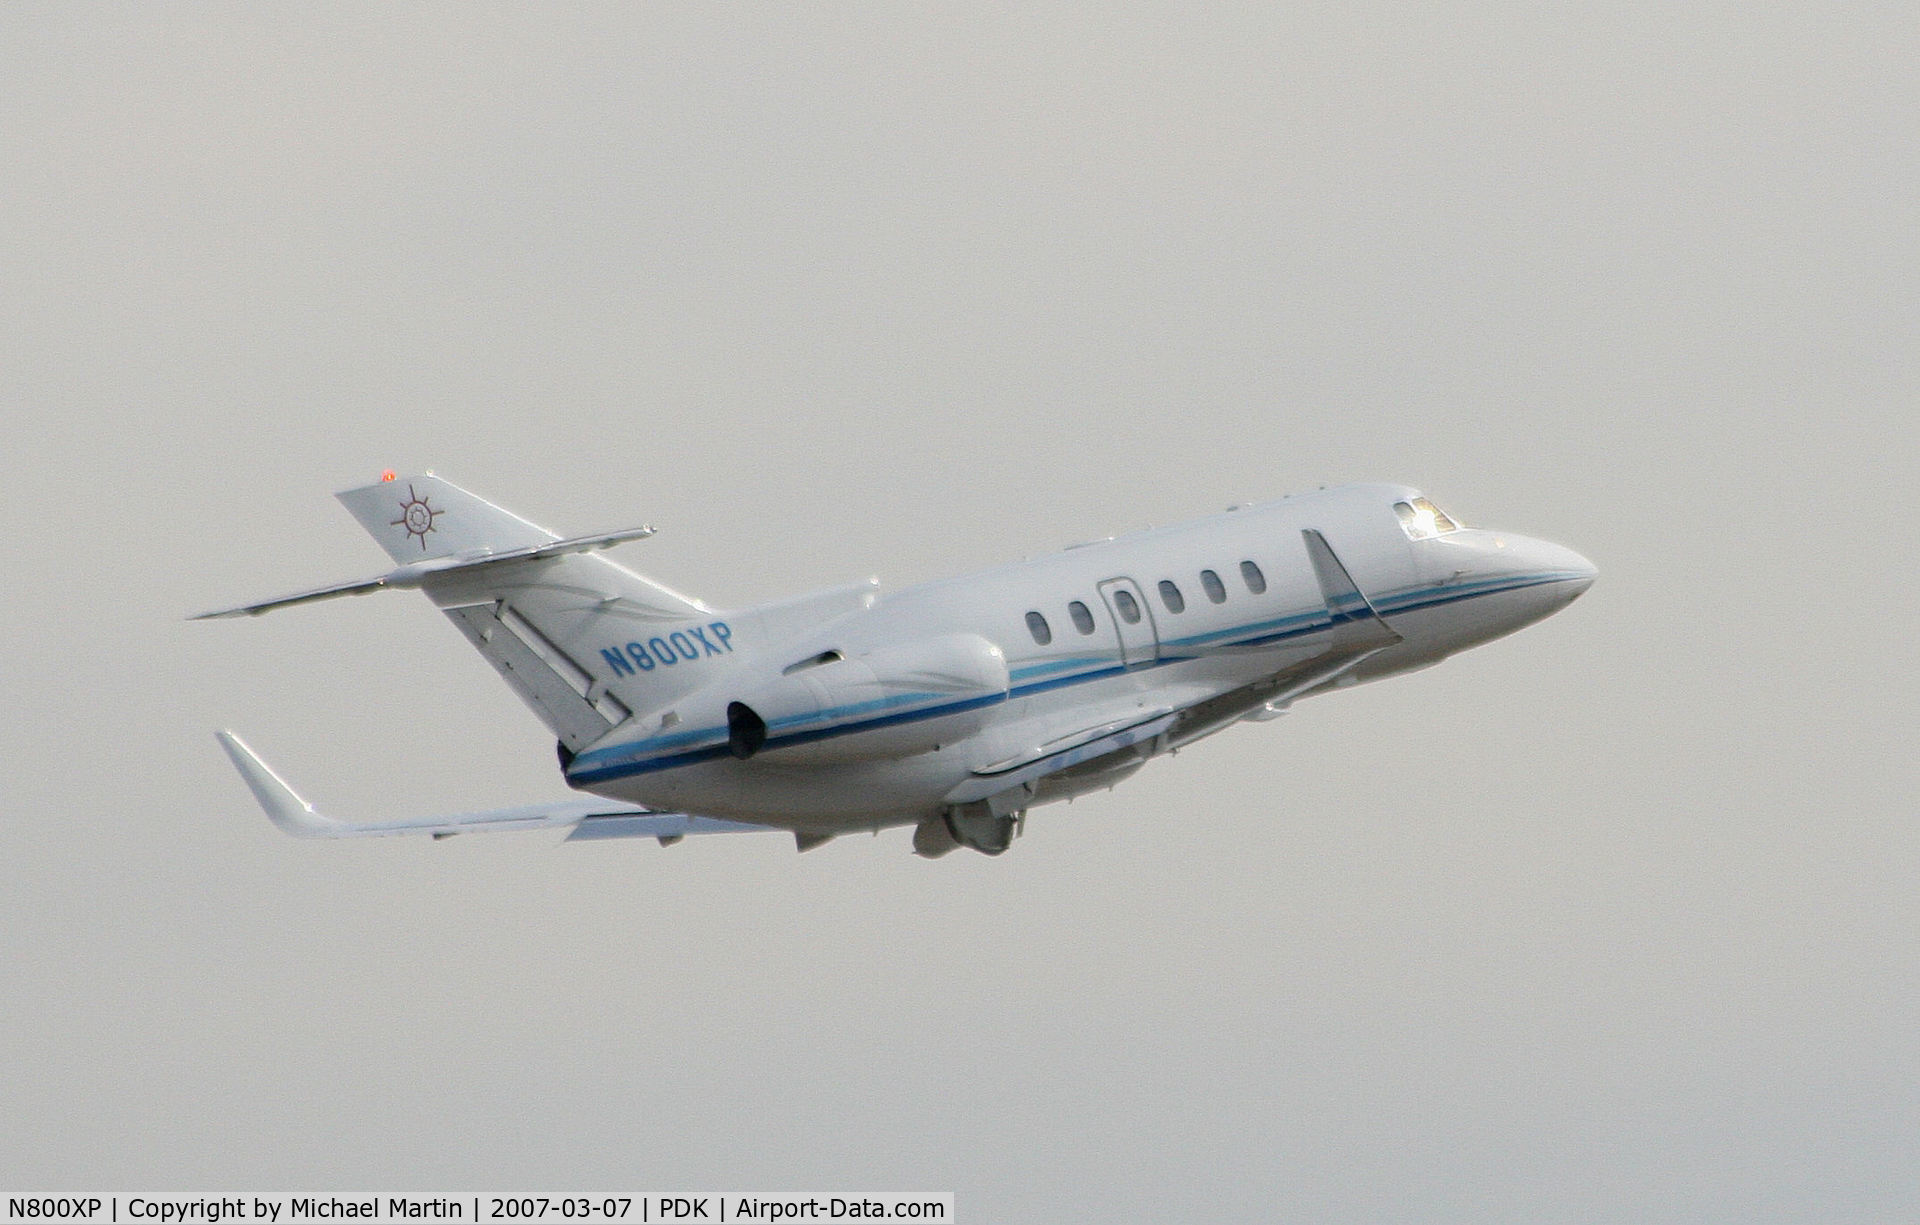 N800XP, 2001 Raytheon Hawker 800XP C/N 258541, Departing PDK enroute to NEW